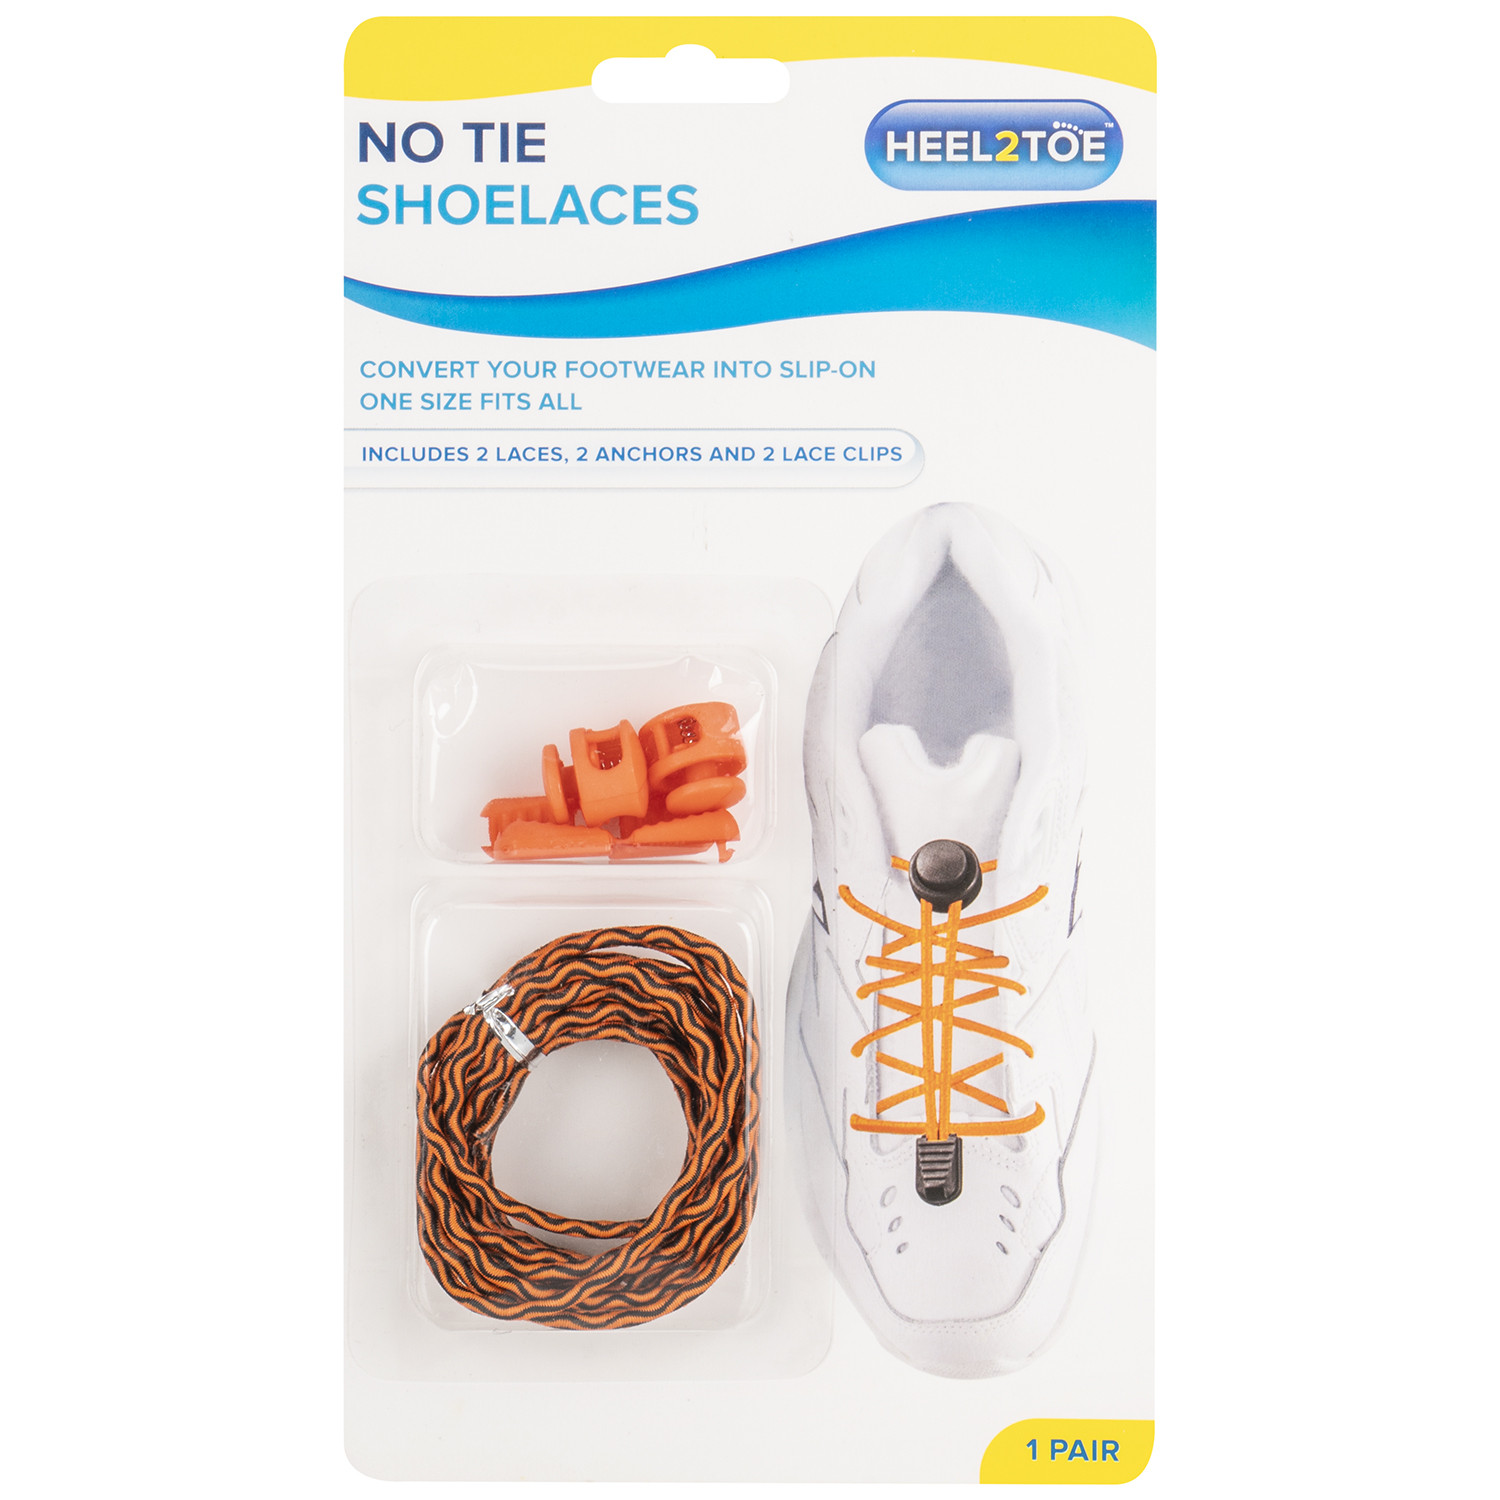 No Tie Shoe Laces With Anchors and Clips Image 2